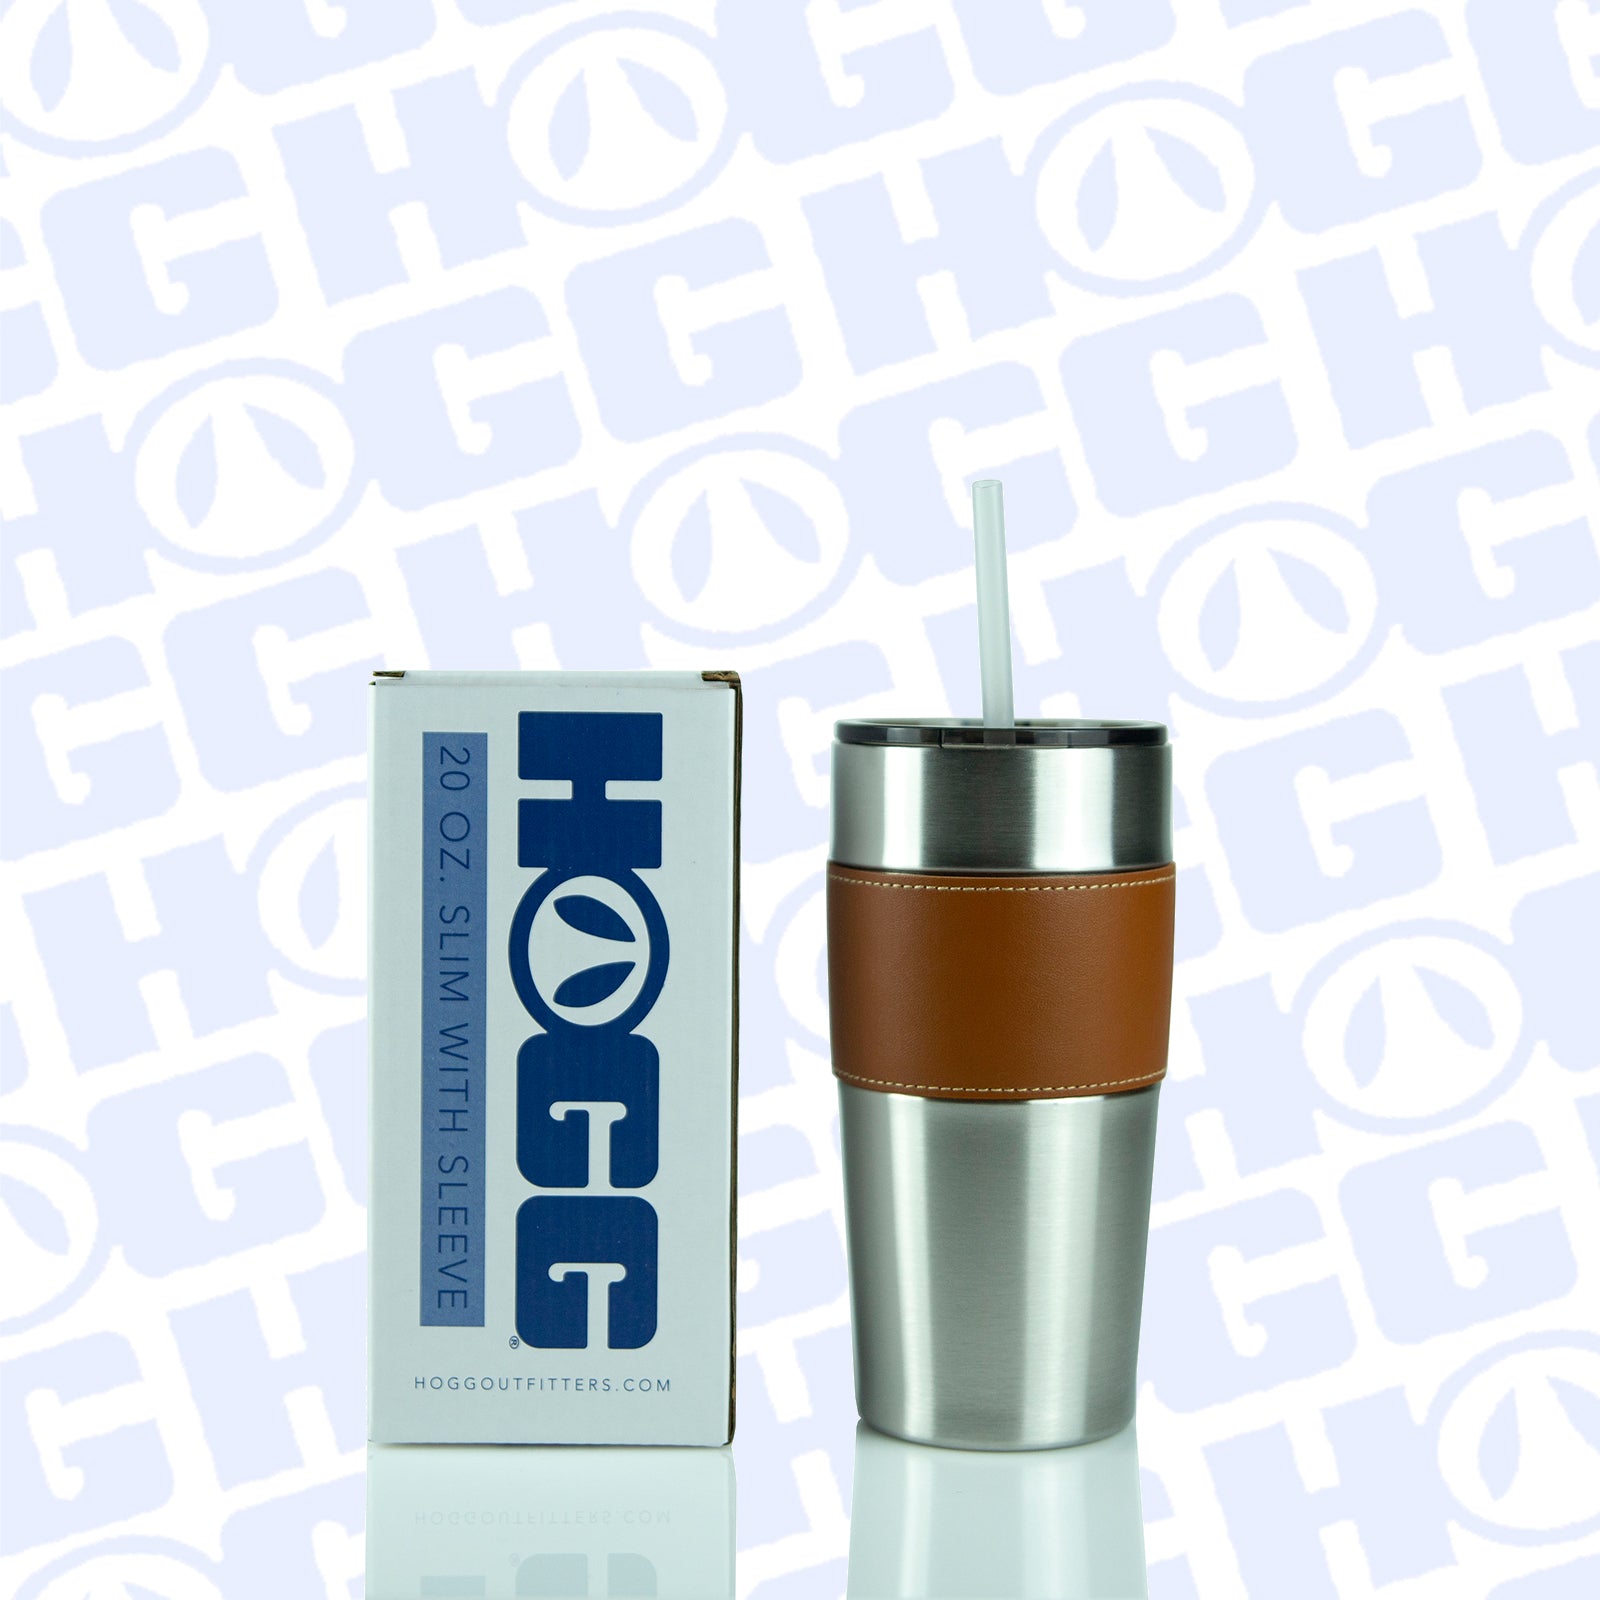 Hogg Outfitters 20oz Modern Twist W/Lid Tumbler Stainless Steel Insulated